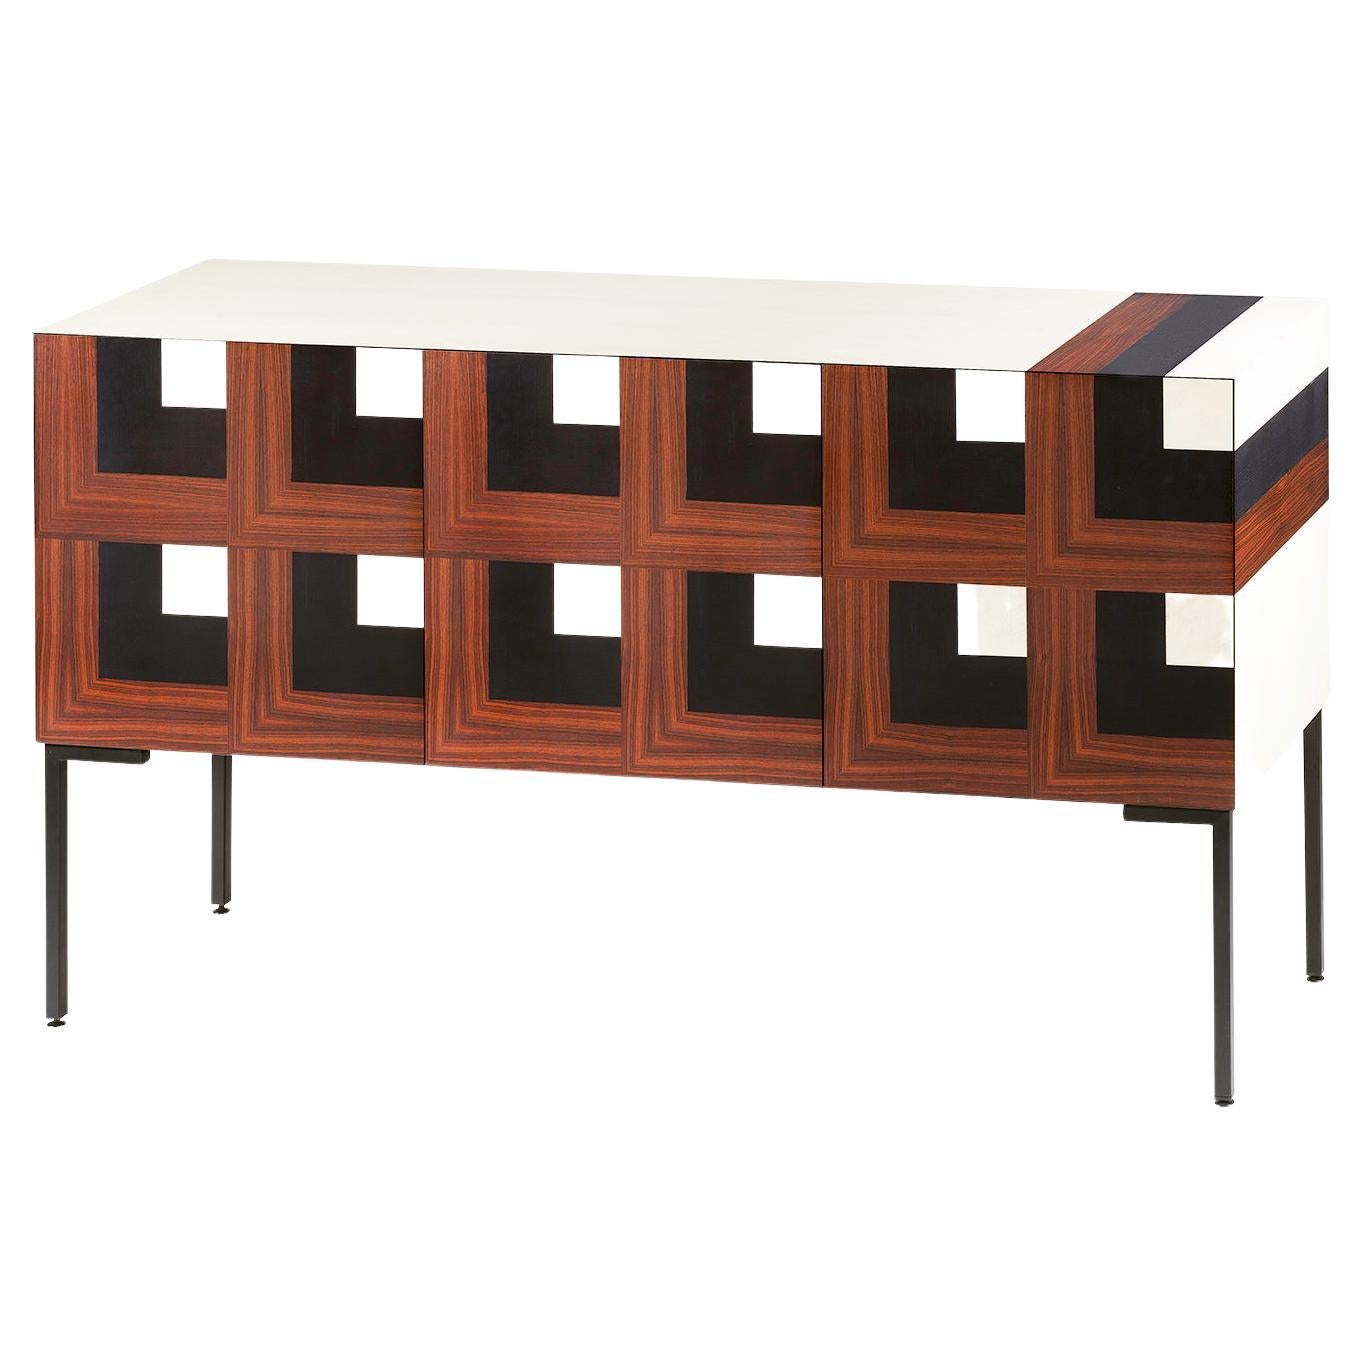 21st Century Cubo Inlaid Sideboard, Kingwood, Ash, Maple, Walnut, Made in Italy